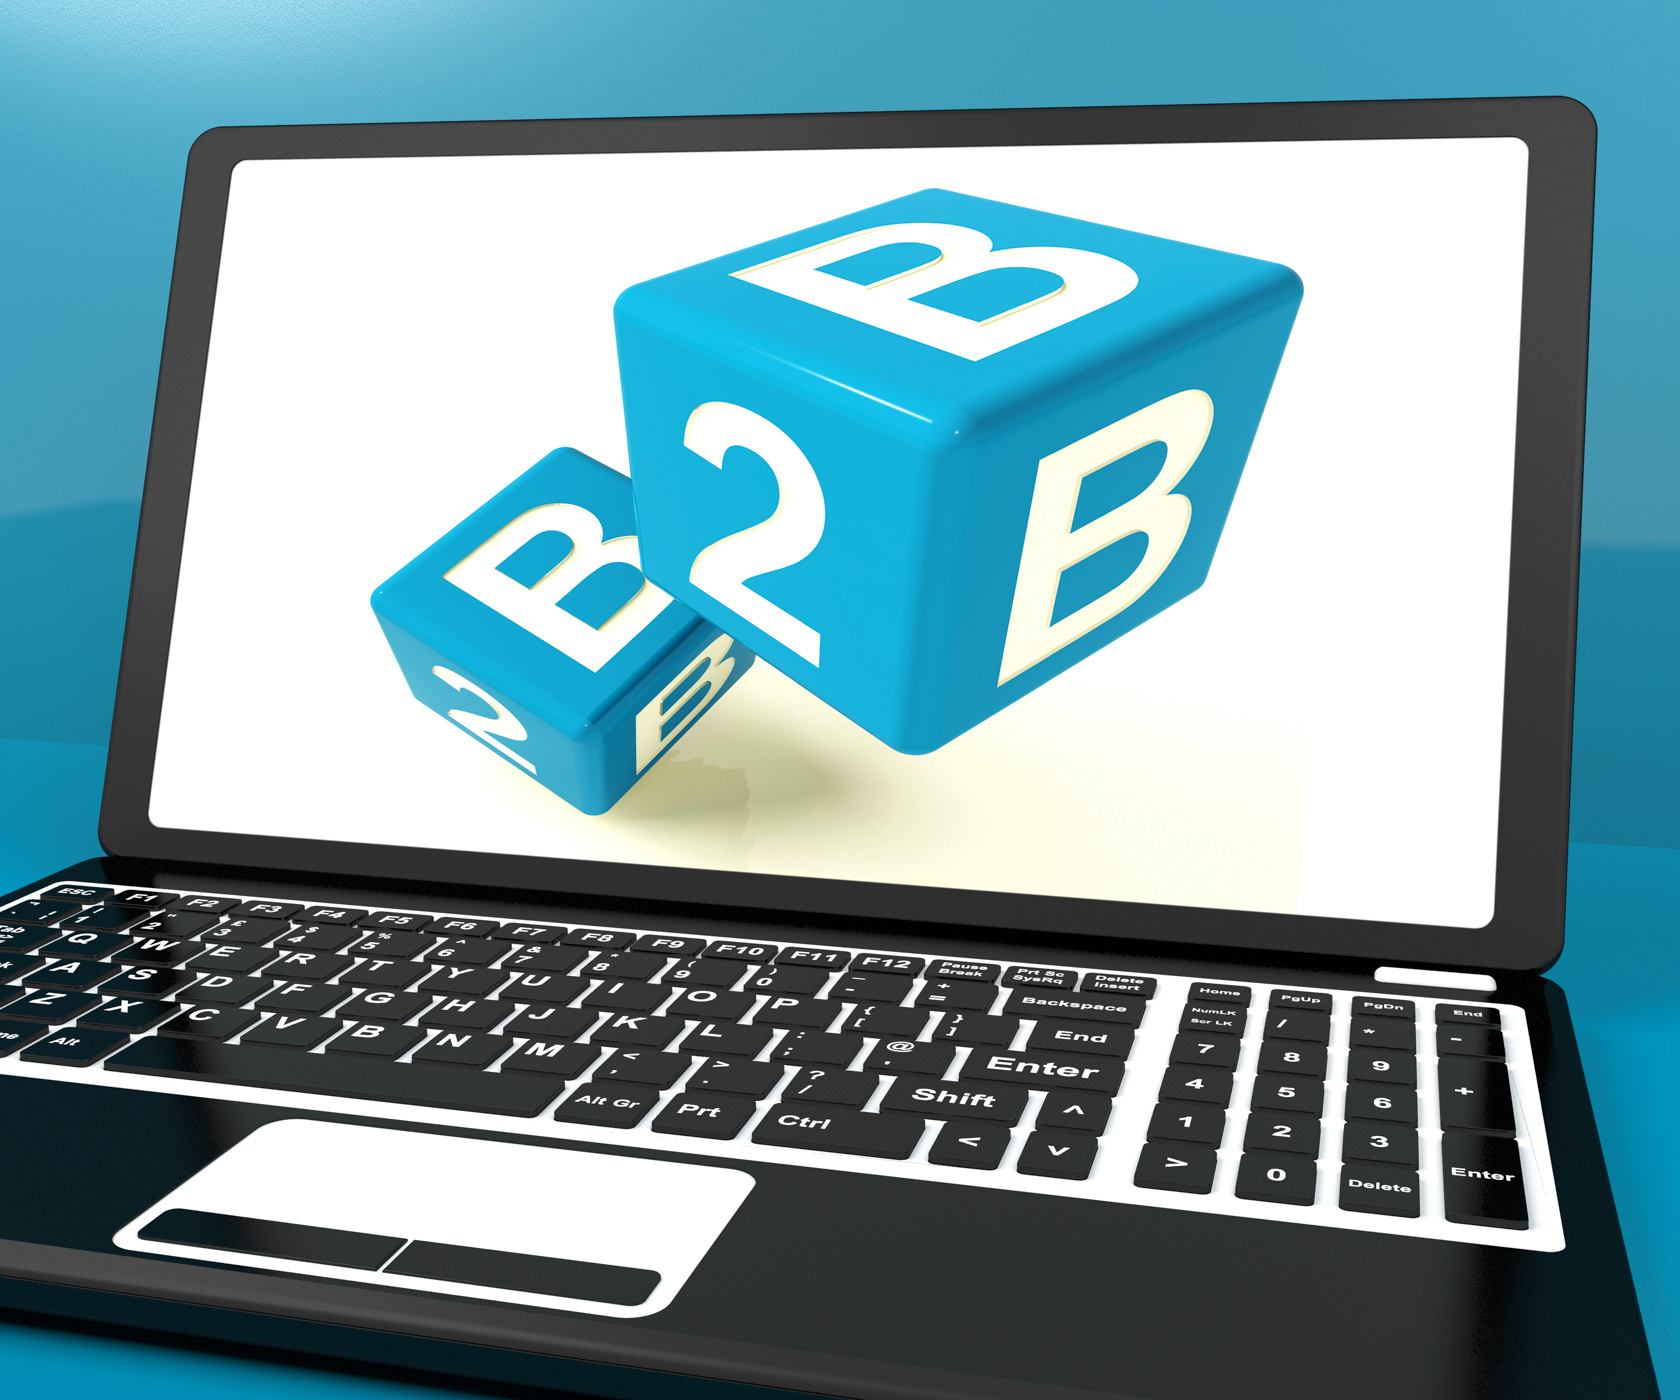 B2b dice on laptop computer shows business and commerce photo